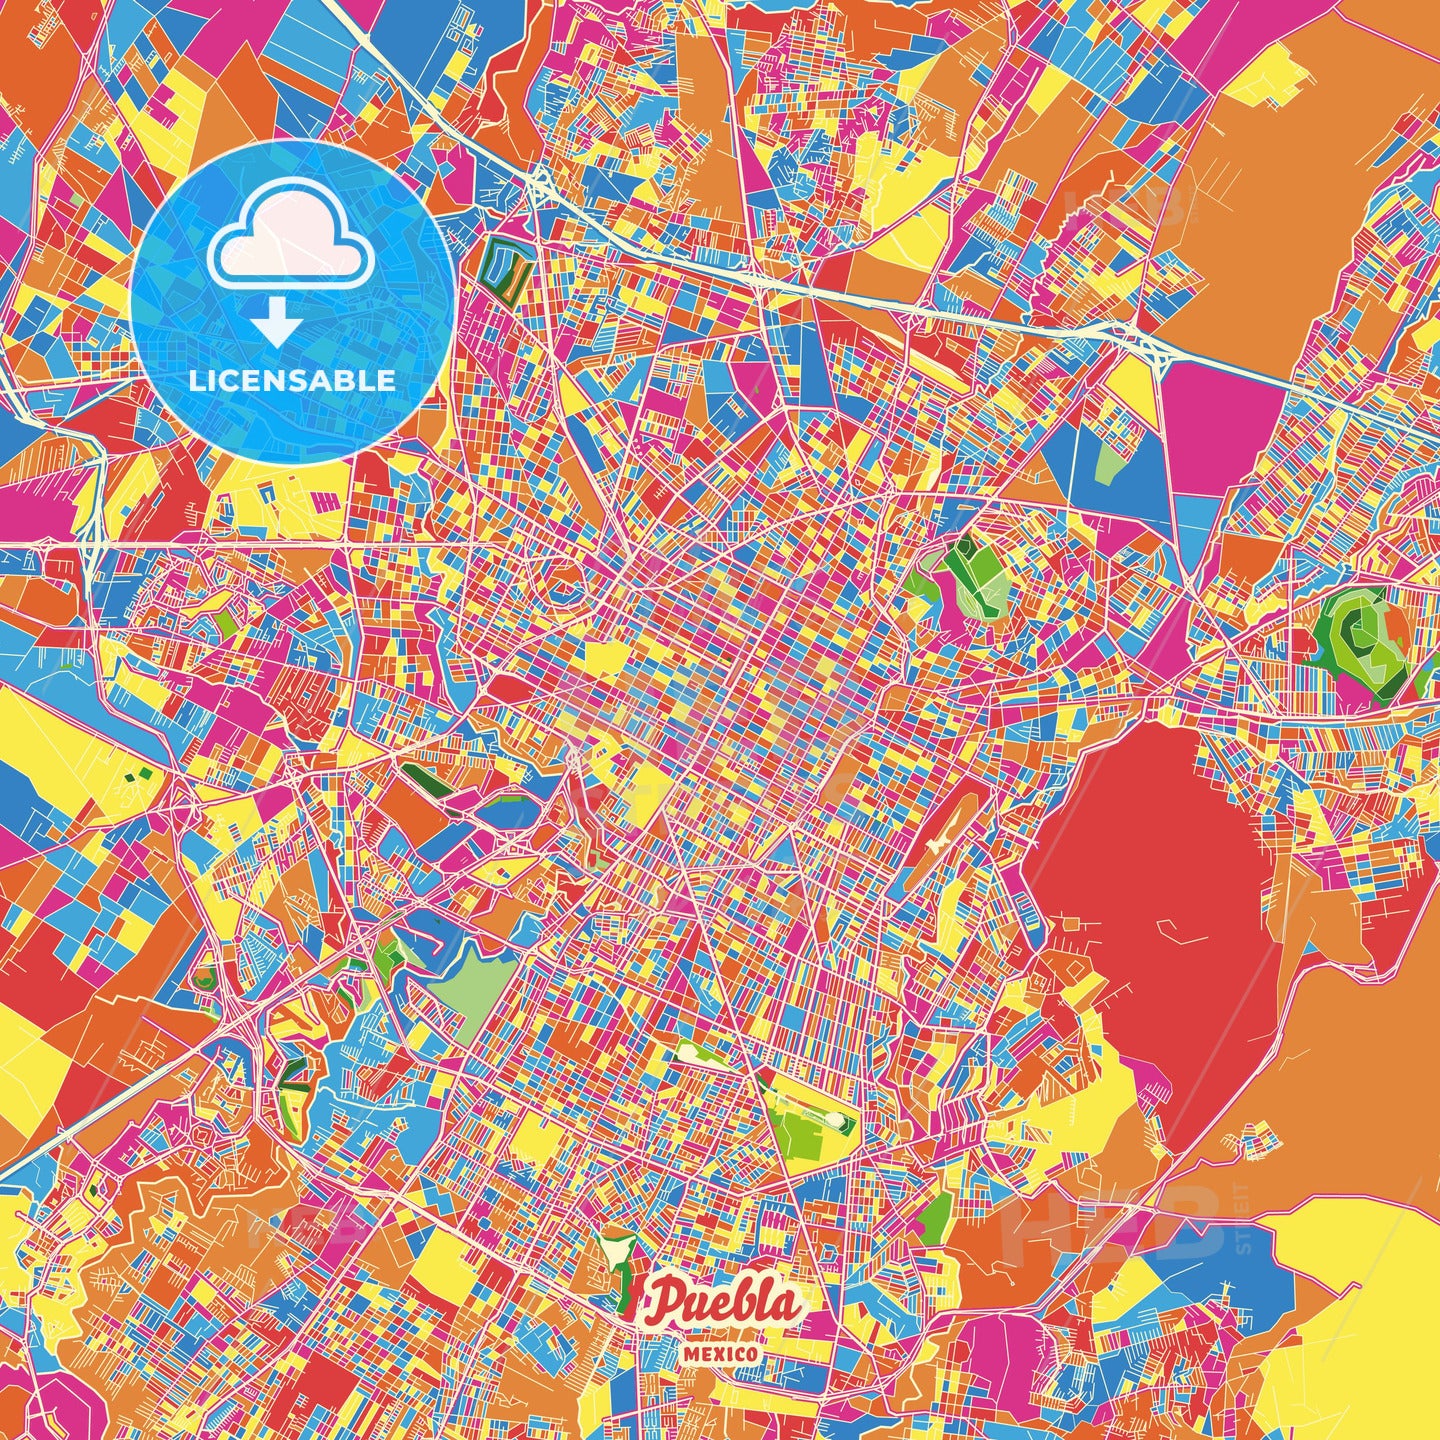 Puebla, Mexico Crazy Colorful Street Map Poster Template - HEBSTREITS Sketches